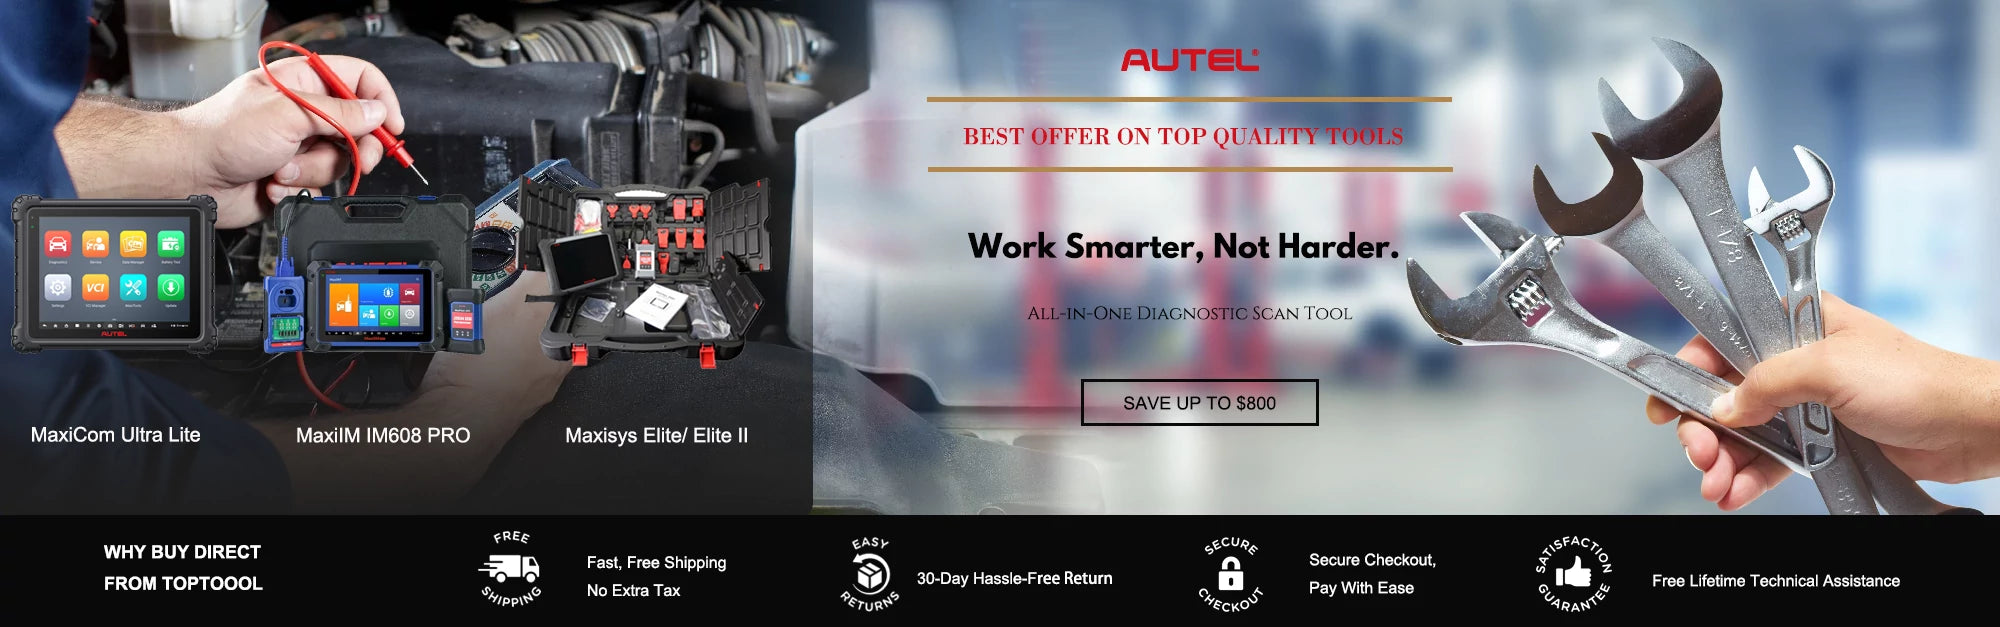 a picture shows top recommended autel all-in-one diagnostic scanners: maxicom ultra lite, maxiim im608 pro, maxisys elite/ elite 2